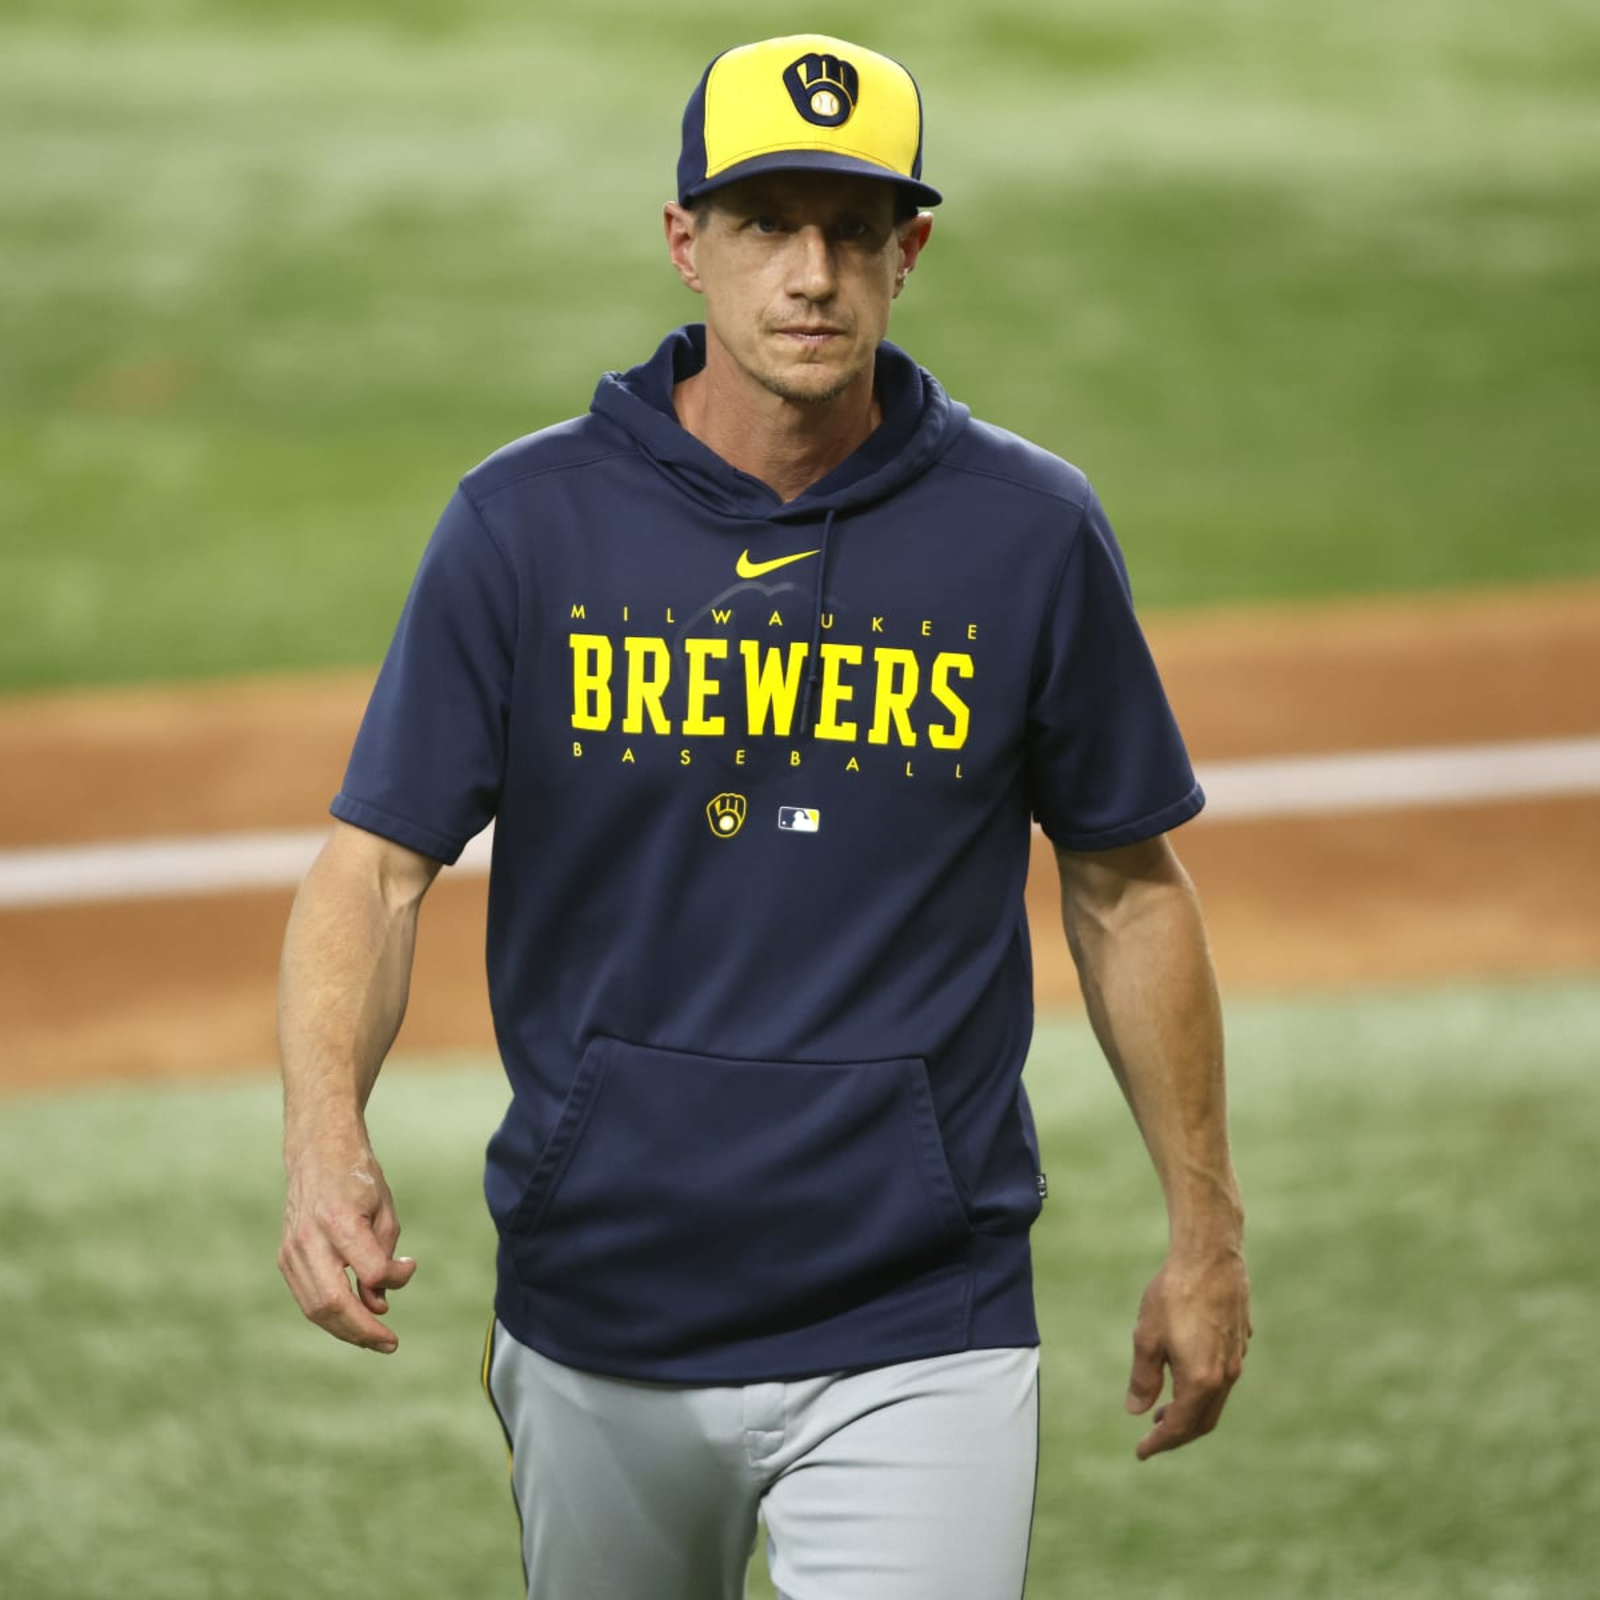 Craig Counsell may Have Managed his Last Game as the Brewers